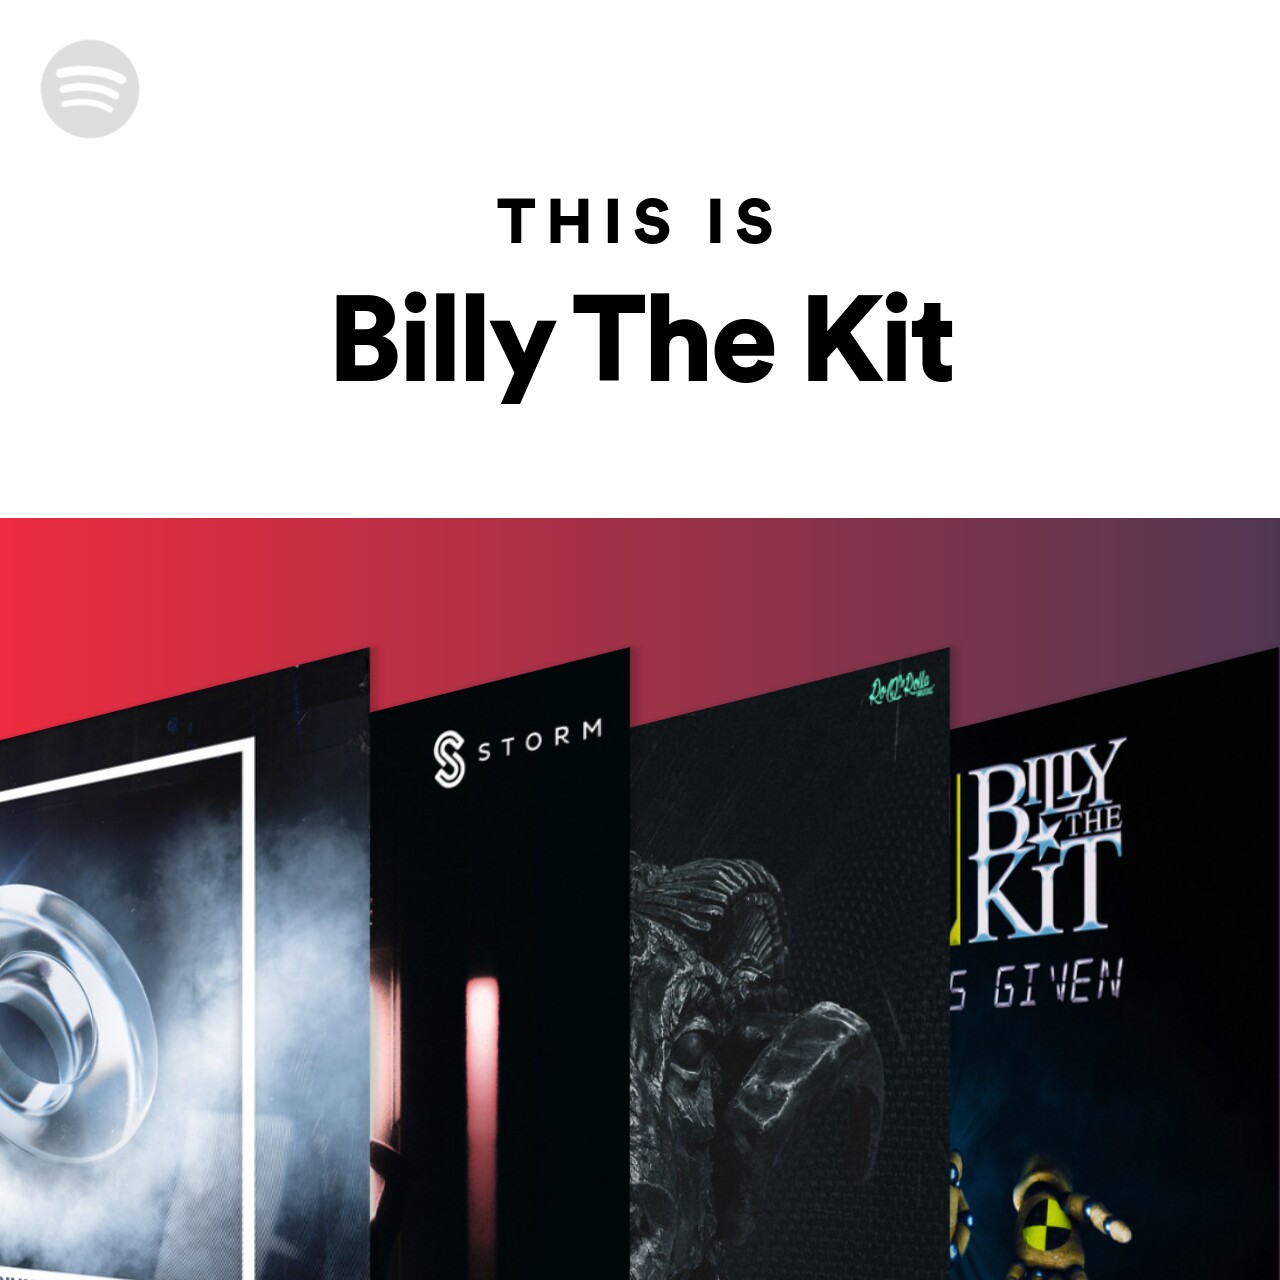 This Is Billy The Kit